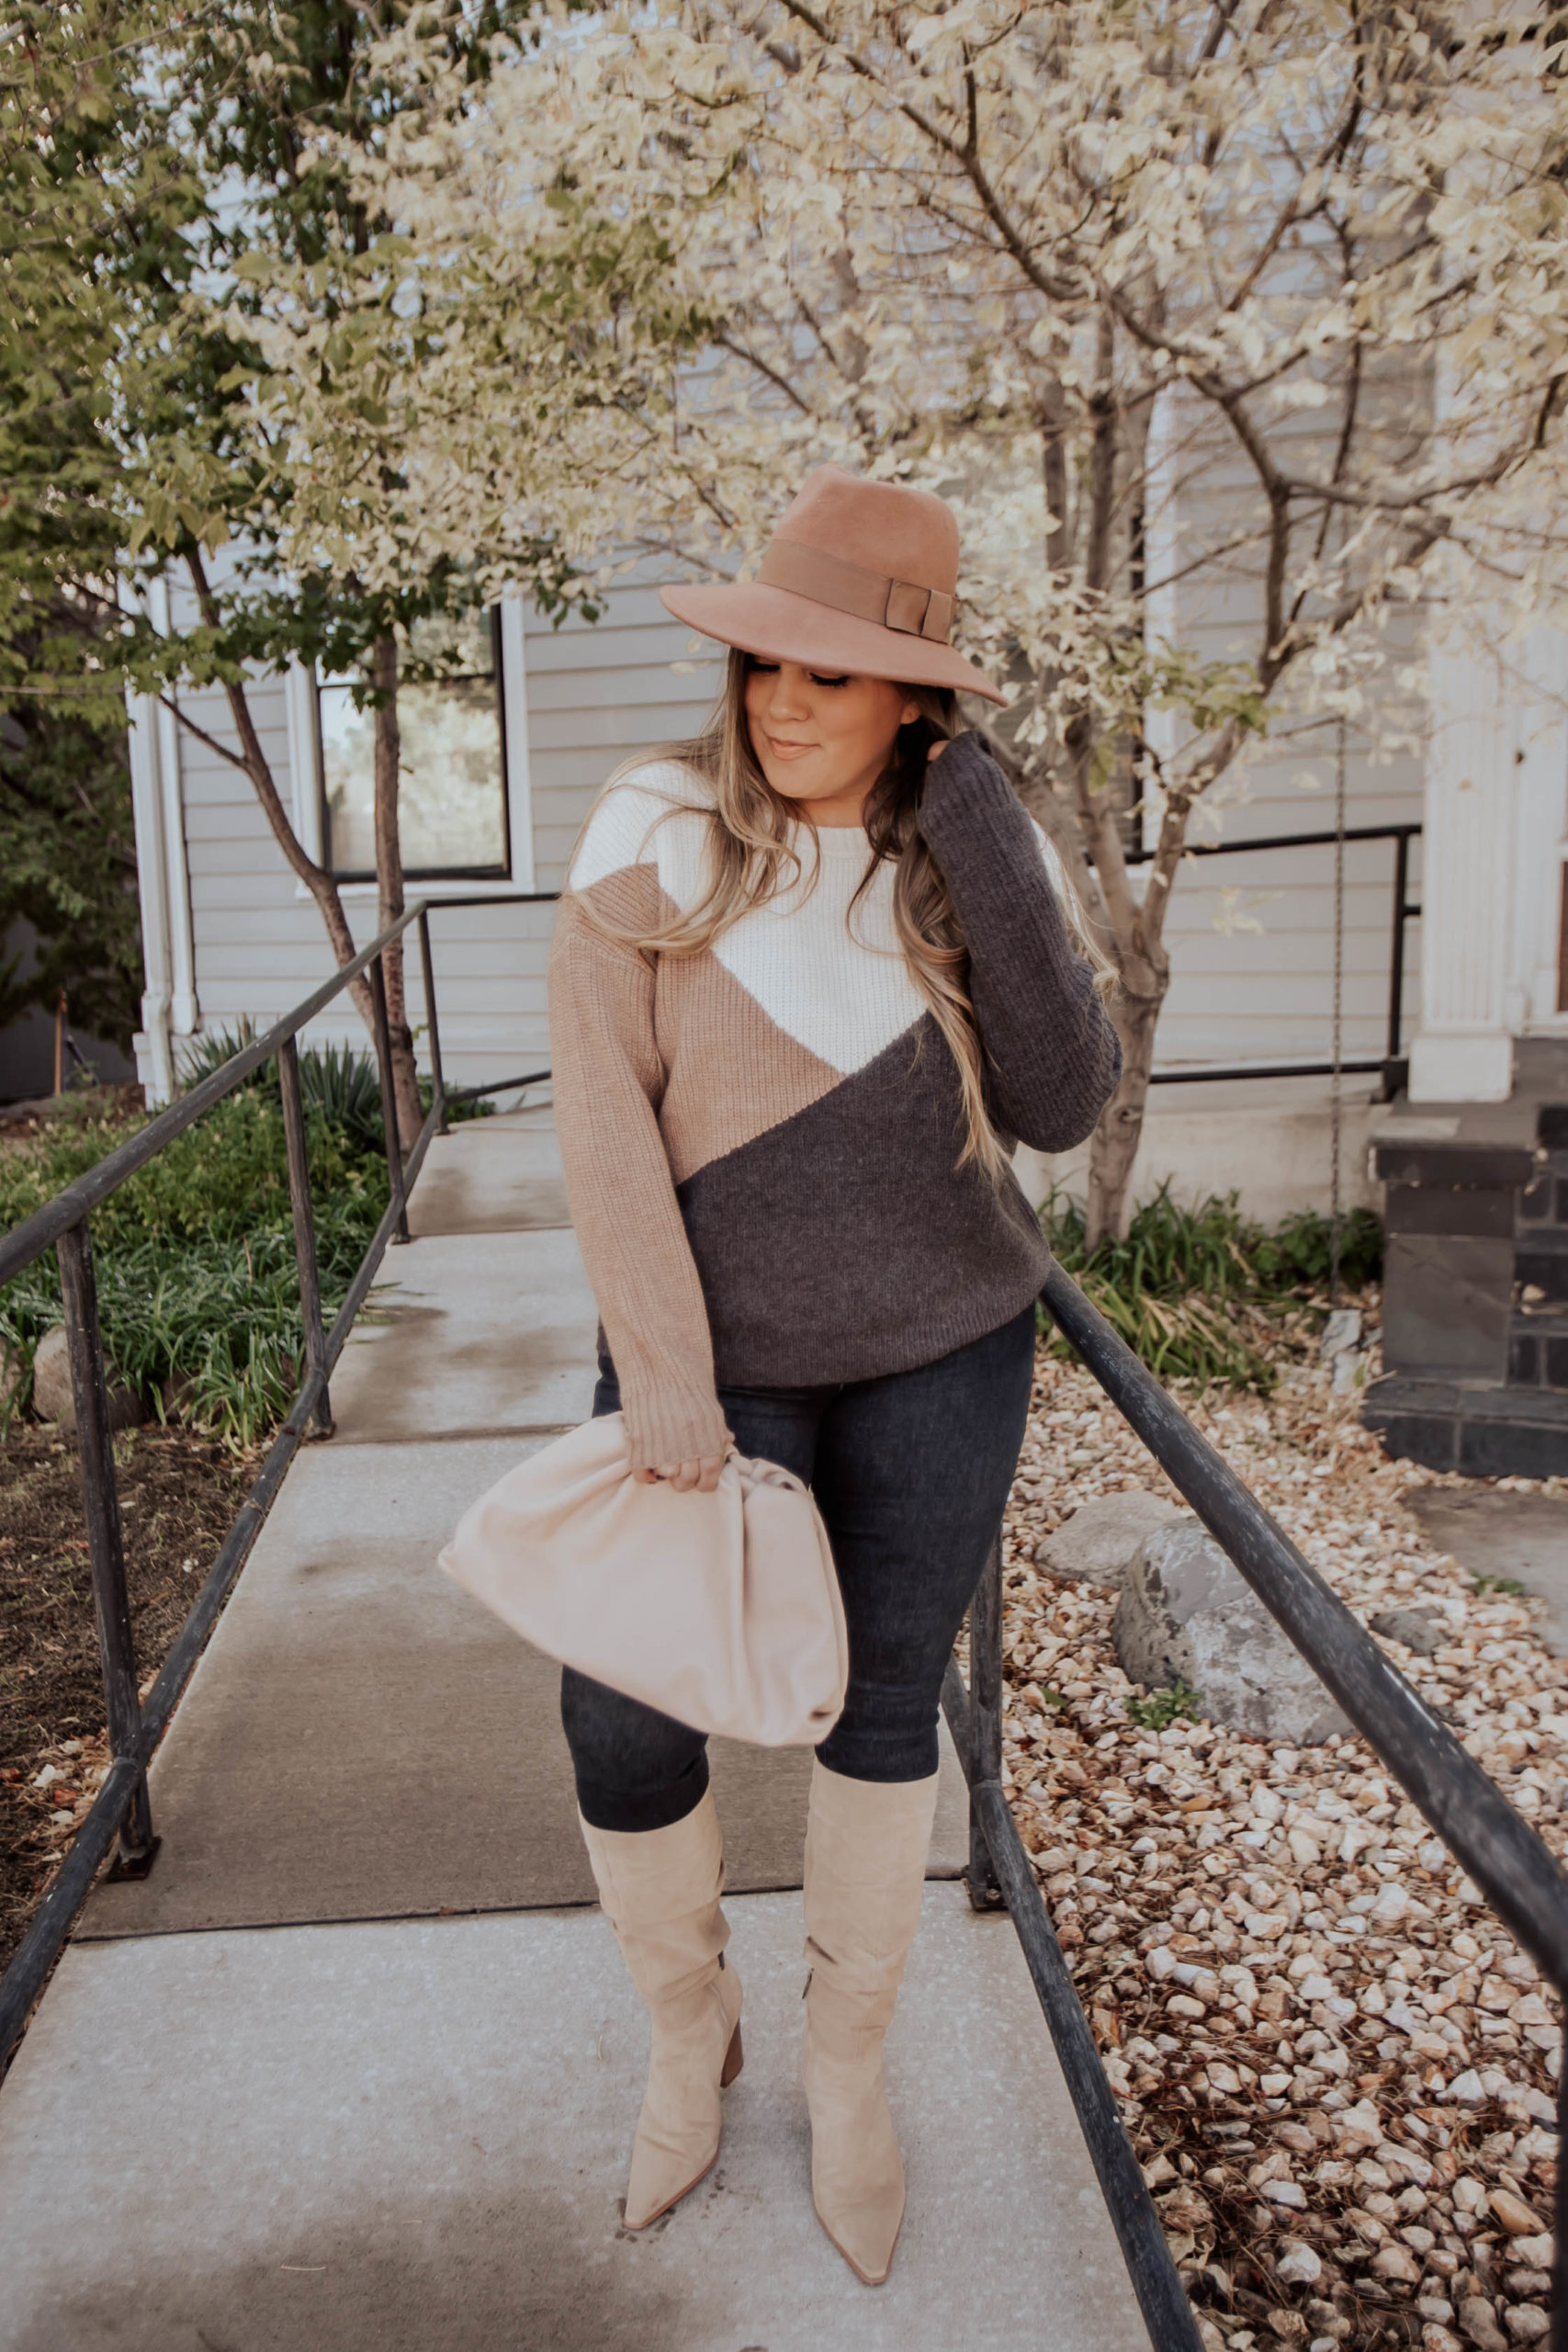 Reno blogger, Ashley Zeal Hurd, from the Ashley and Emily blog shares "Ashley's October Bestsellers" - her top selling items last month!